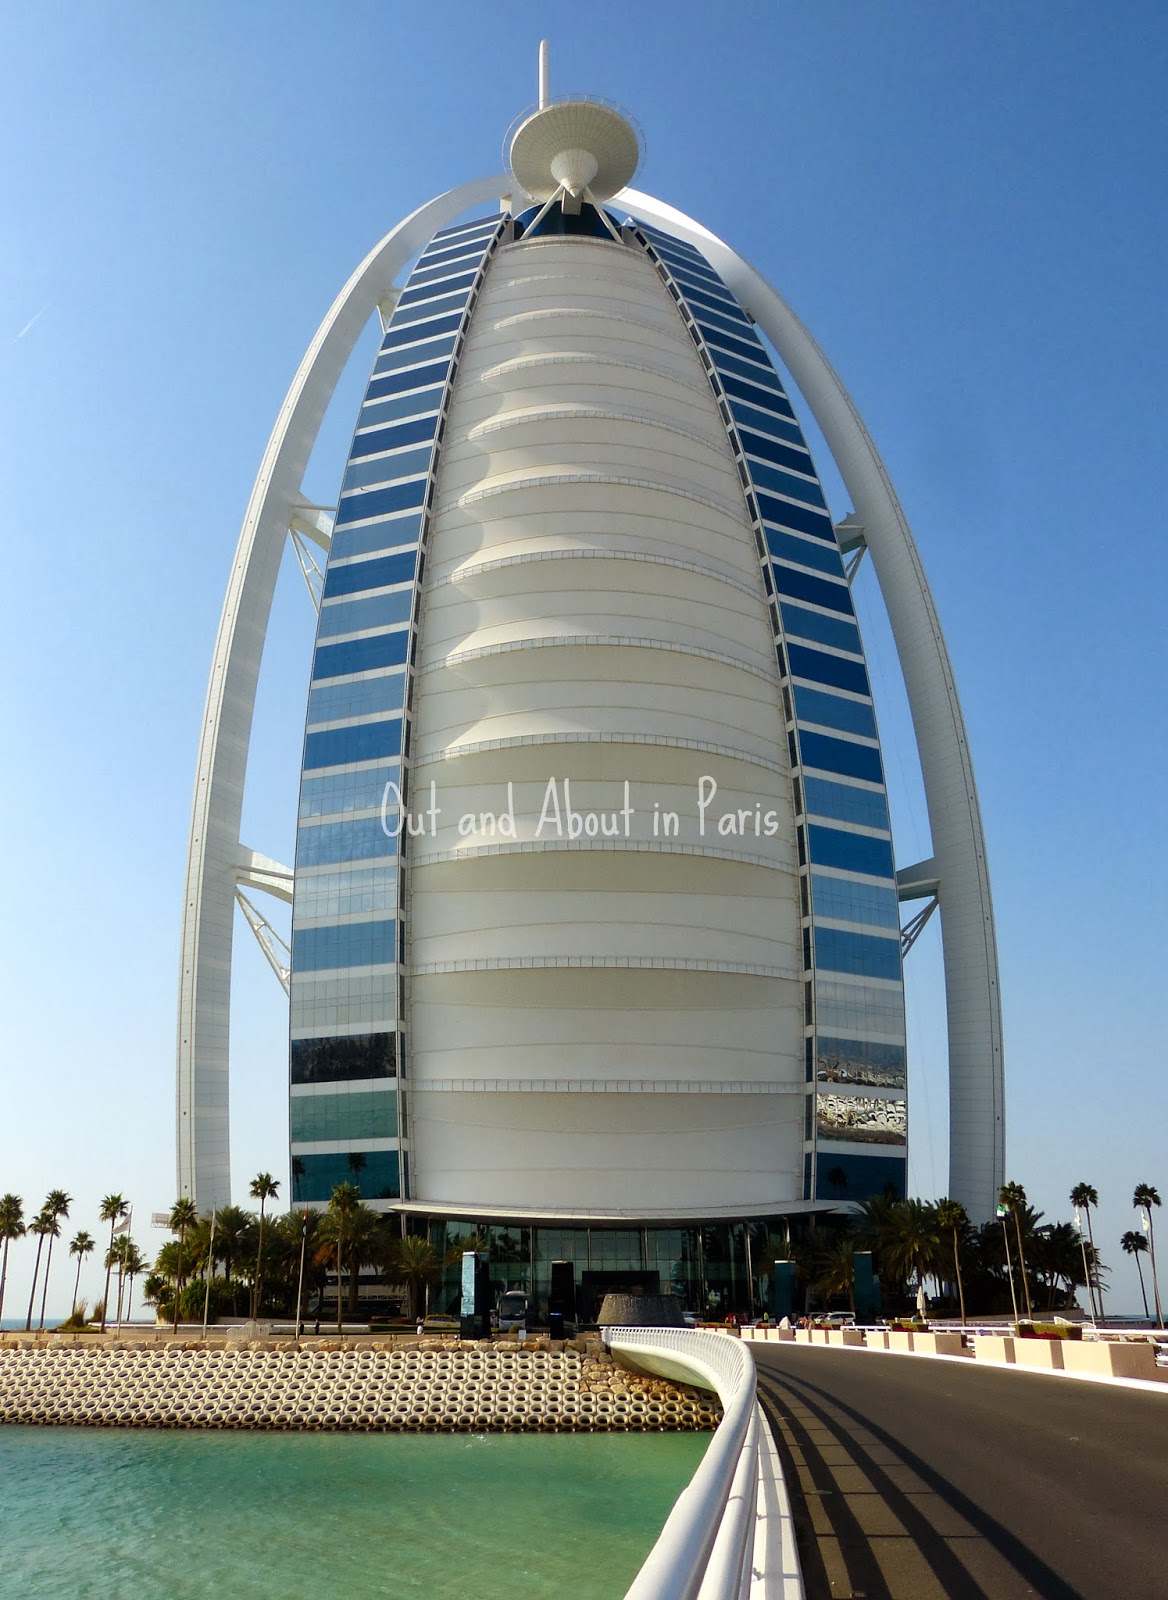 Afternoon tea at the world's only 7-star hotel, the Burj Al Arab in Dubai